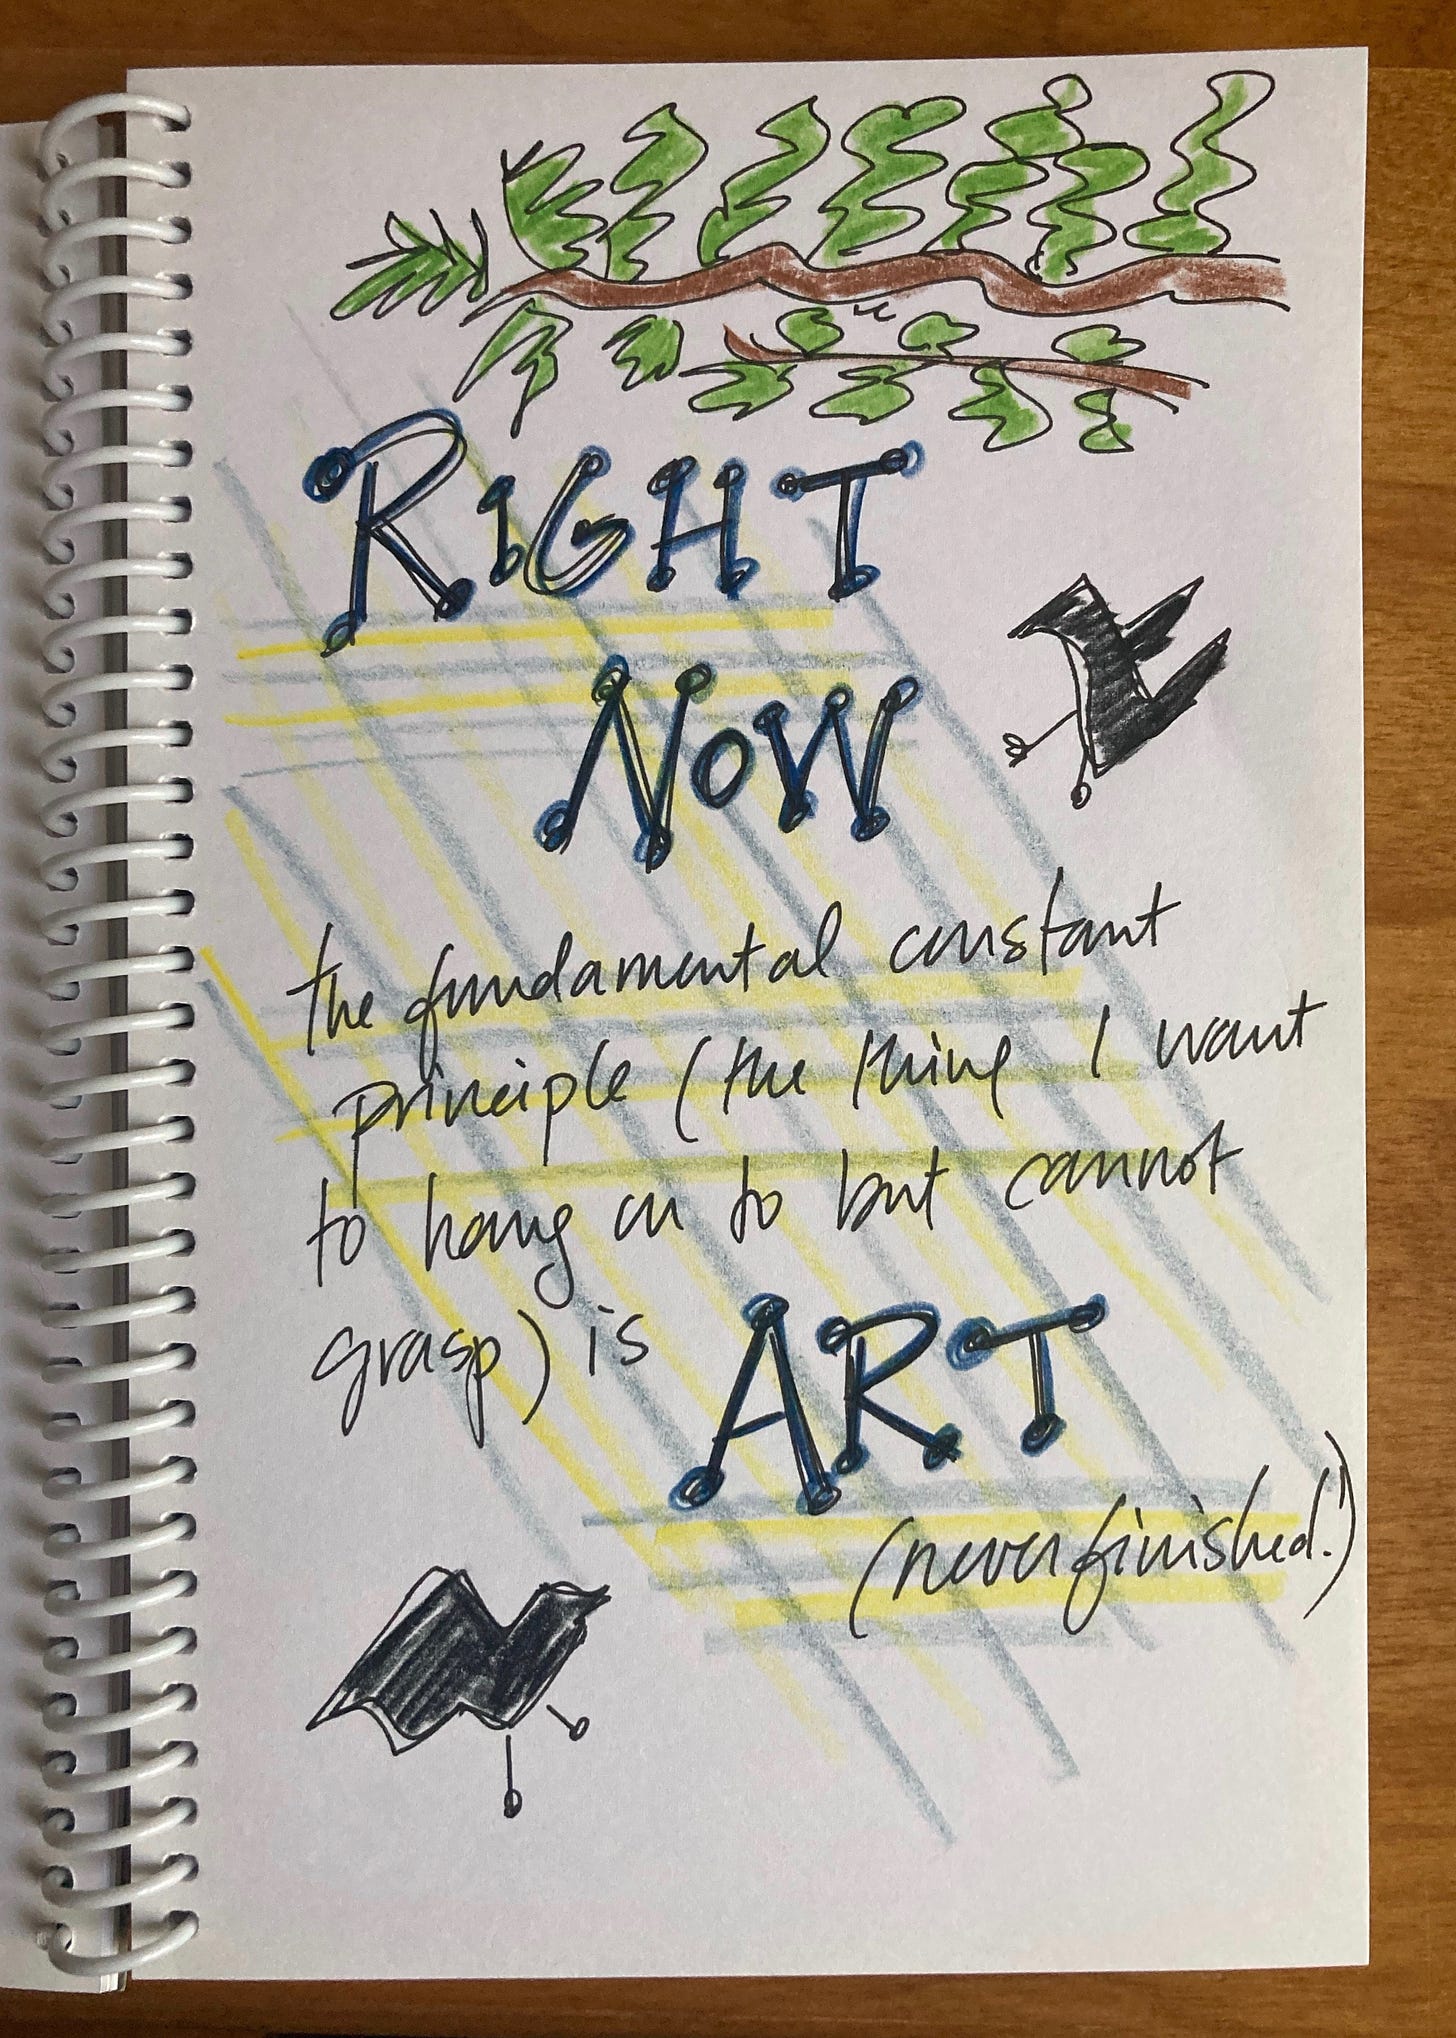 photo of a sketchbook open to an ink and colored pencil sketch of a tree branch, crows, and sunlight and shadows with the handwritten text: Right now the fundamental constant principle (the thing I want to hang on to but cannot grasp) is art (never finished)